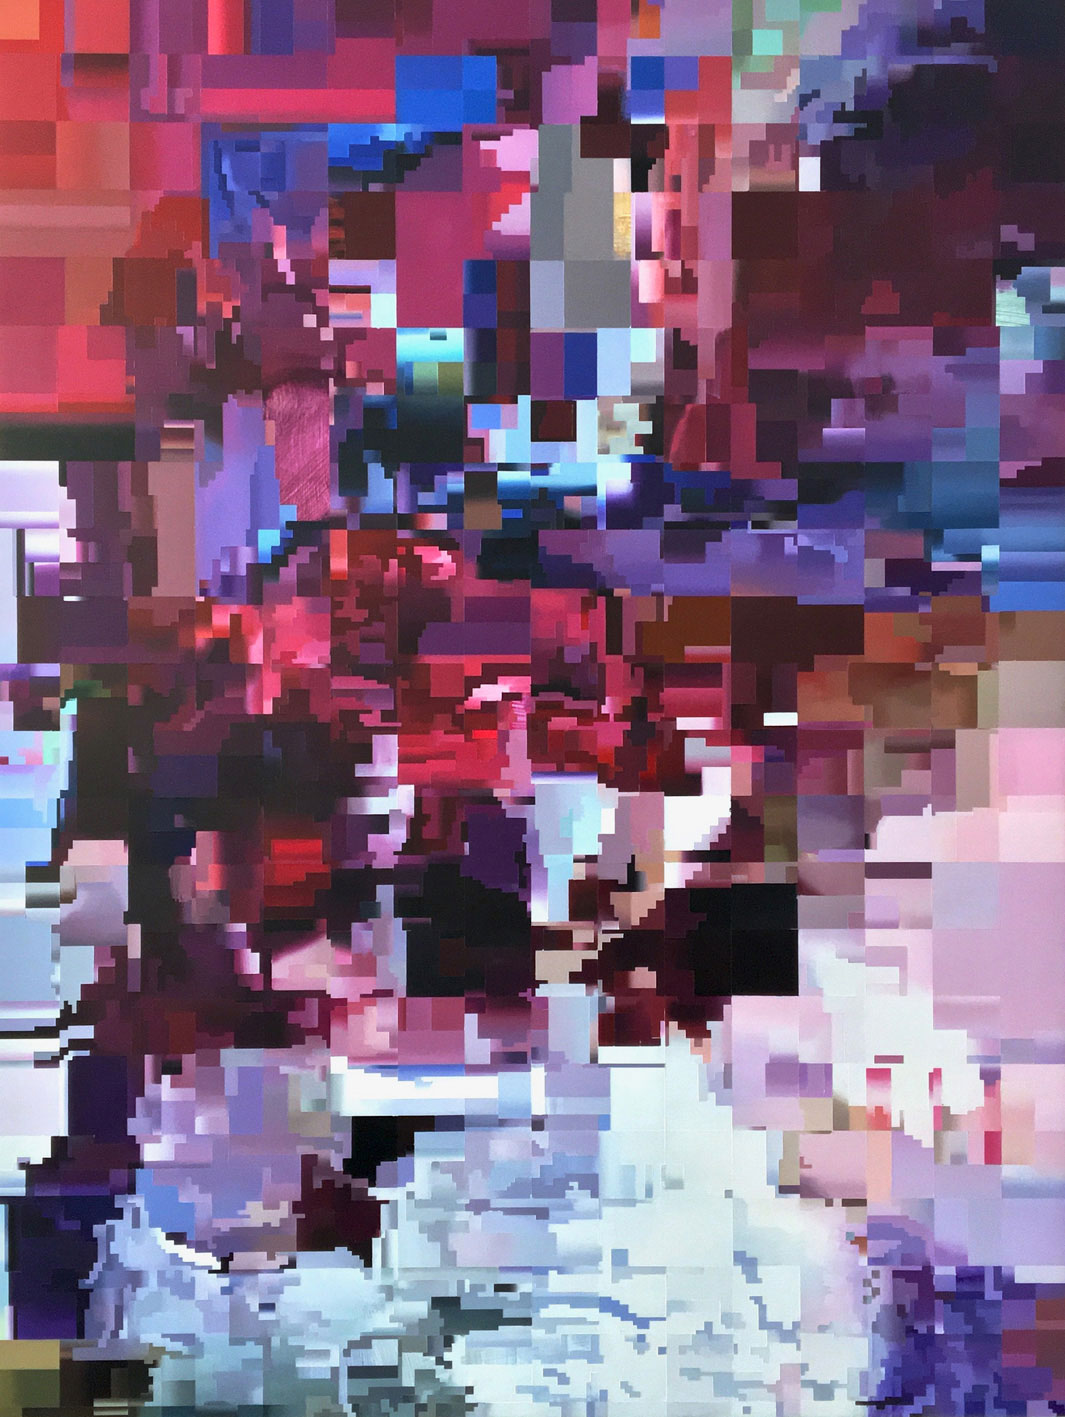 Oil painting by artist and painter Paul Lemmon in rich colours of purple, red and blue depicting a pixelated frame from a glitched digital video